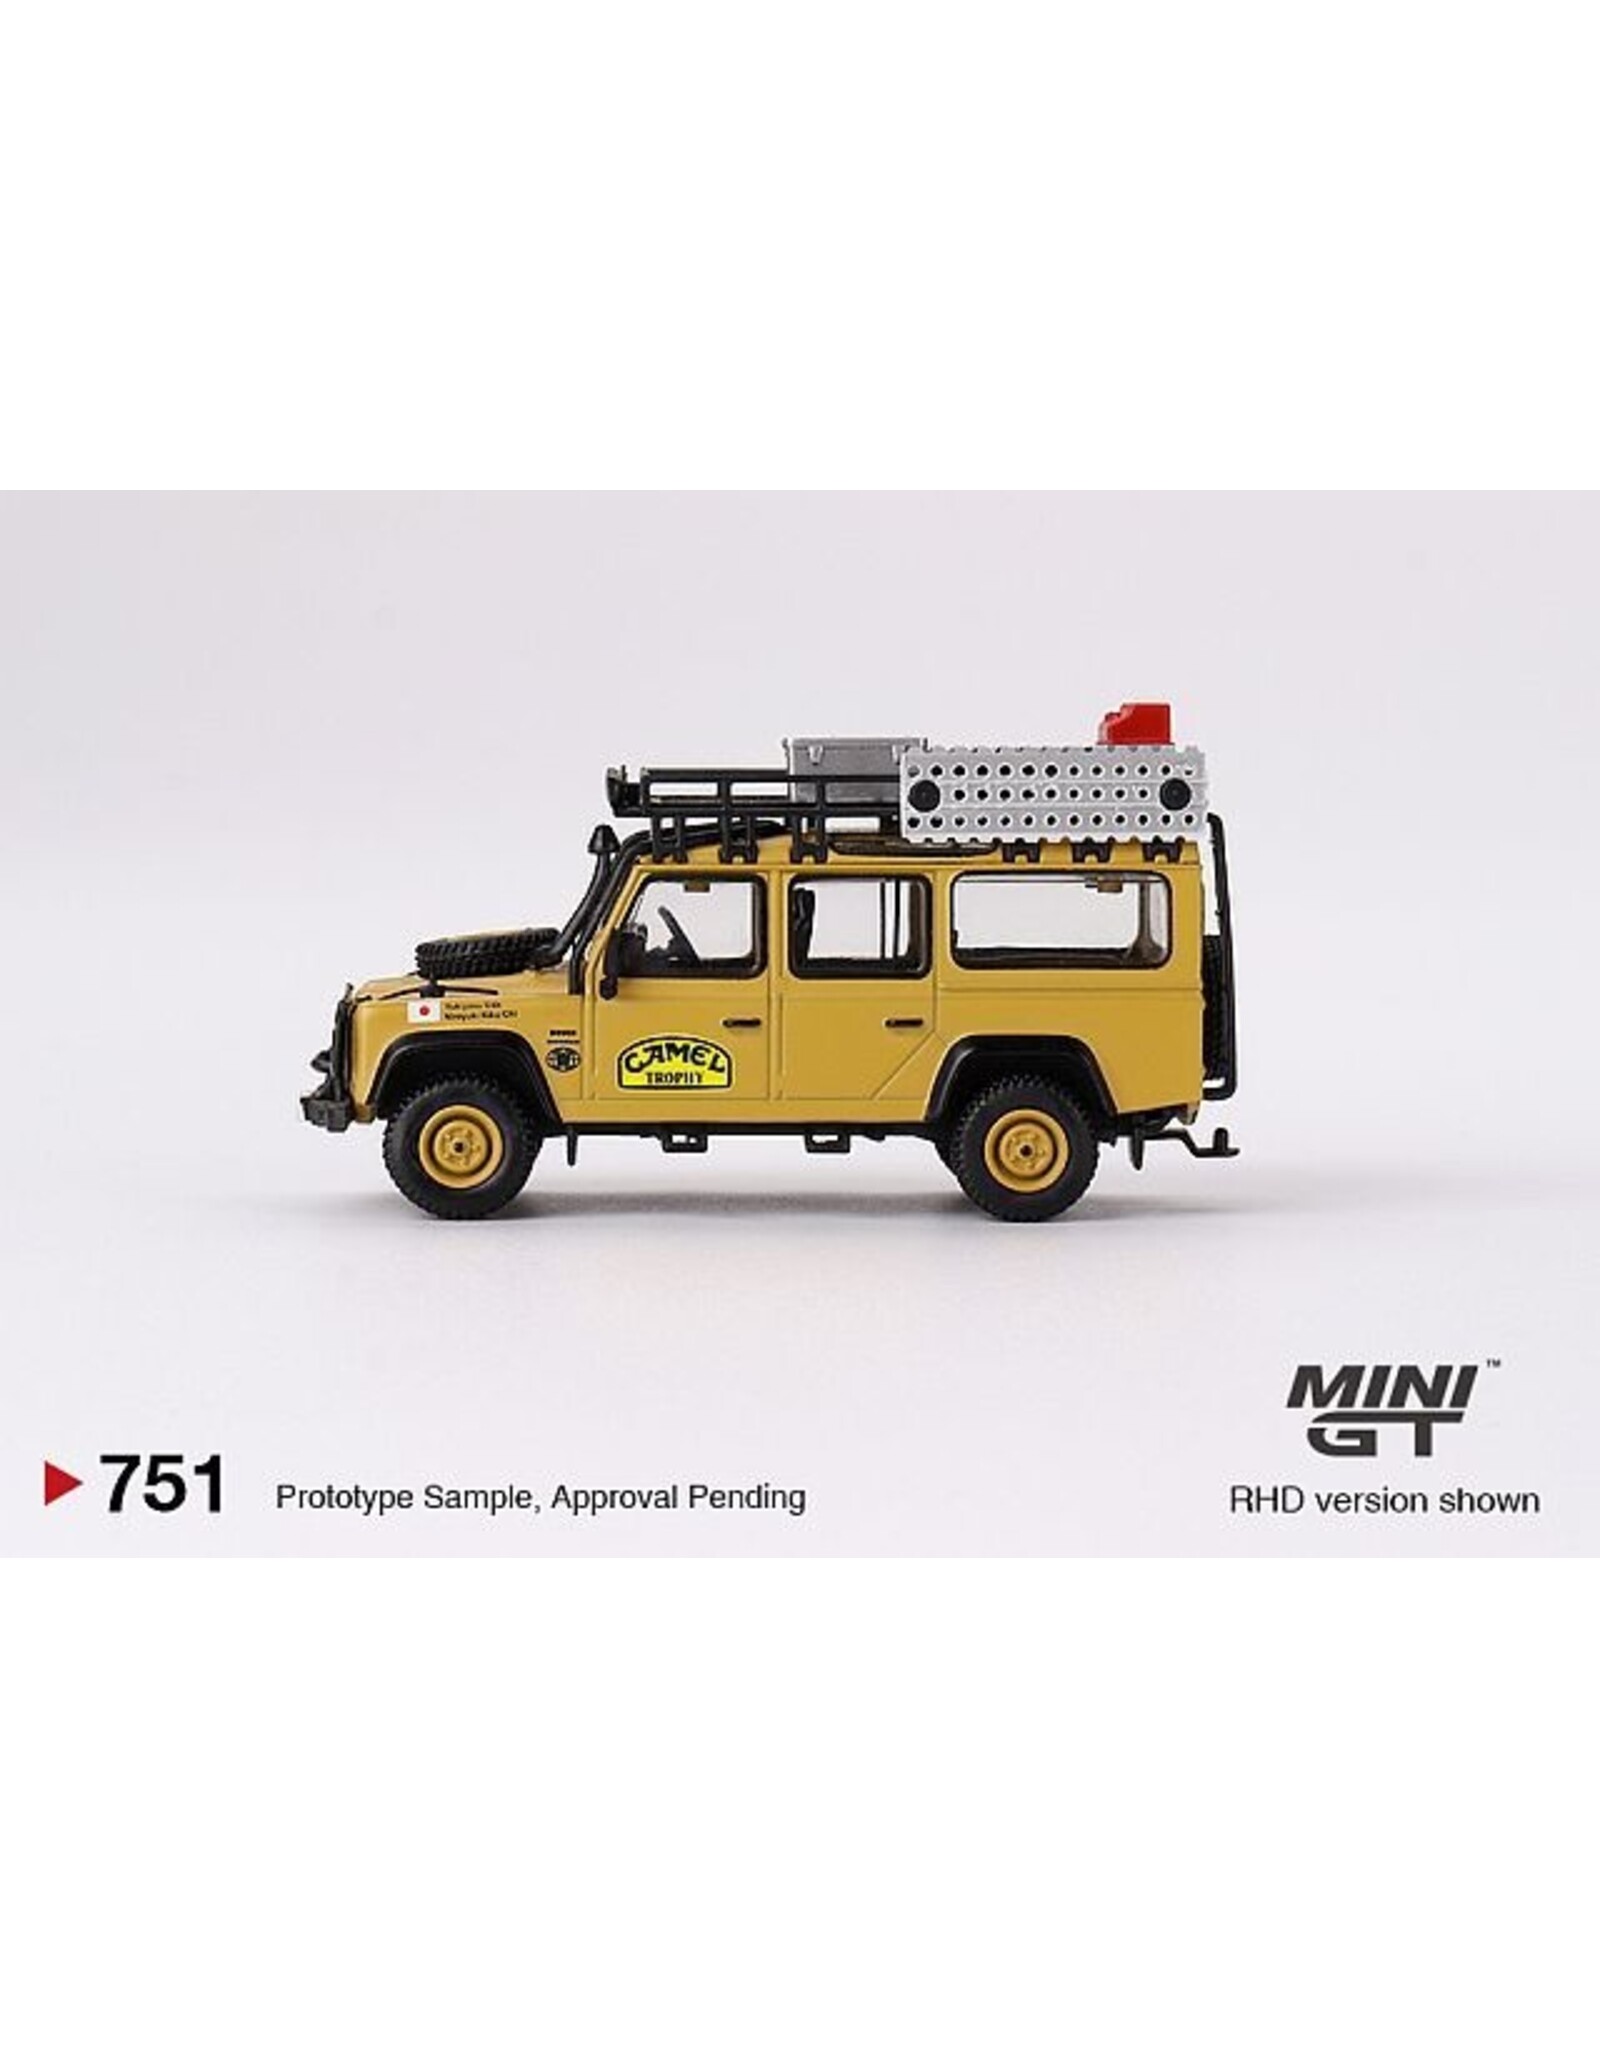 Land Rover Land Rover Defender 110(1989)yellow Amazon team Japan(Camel Trophy)